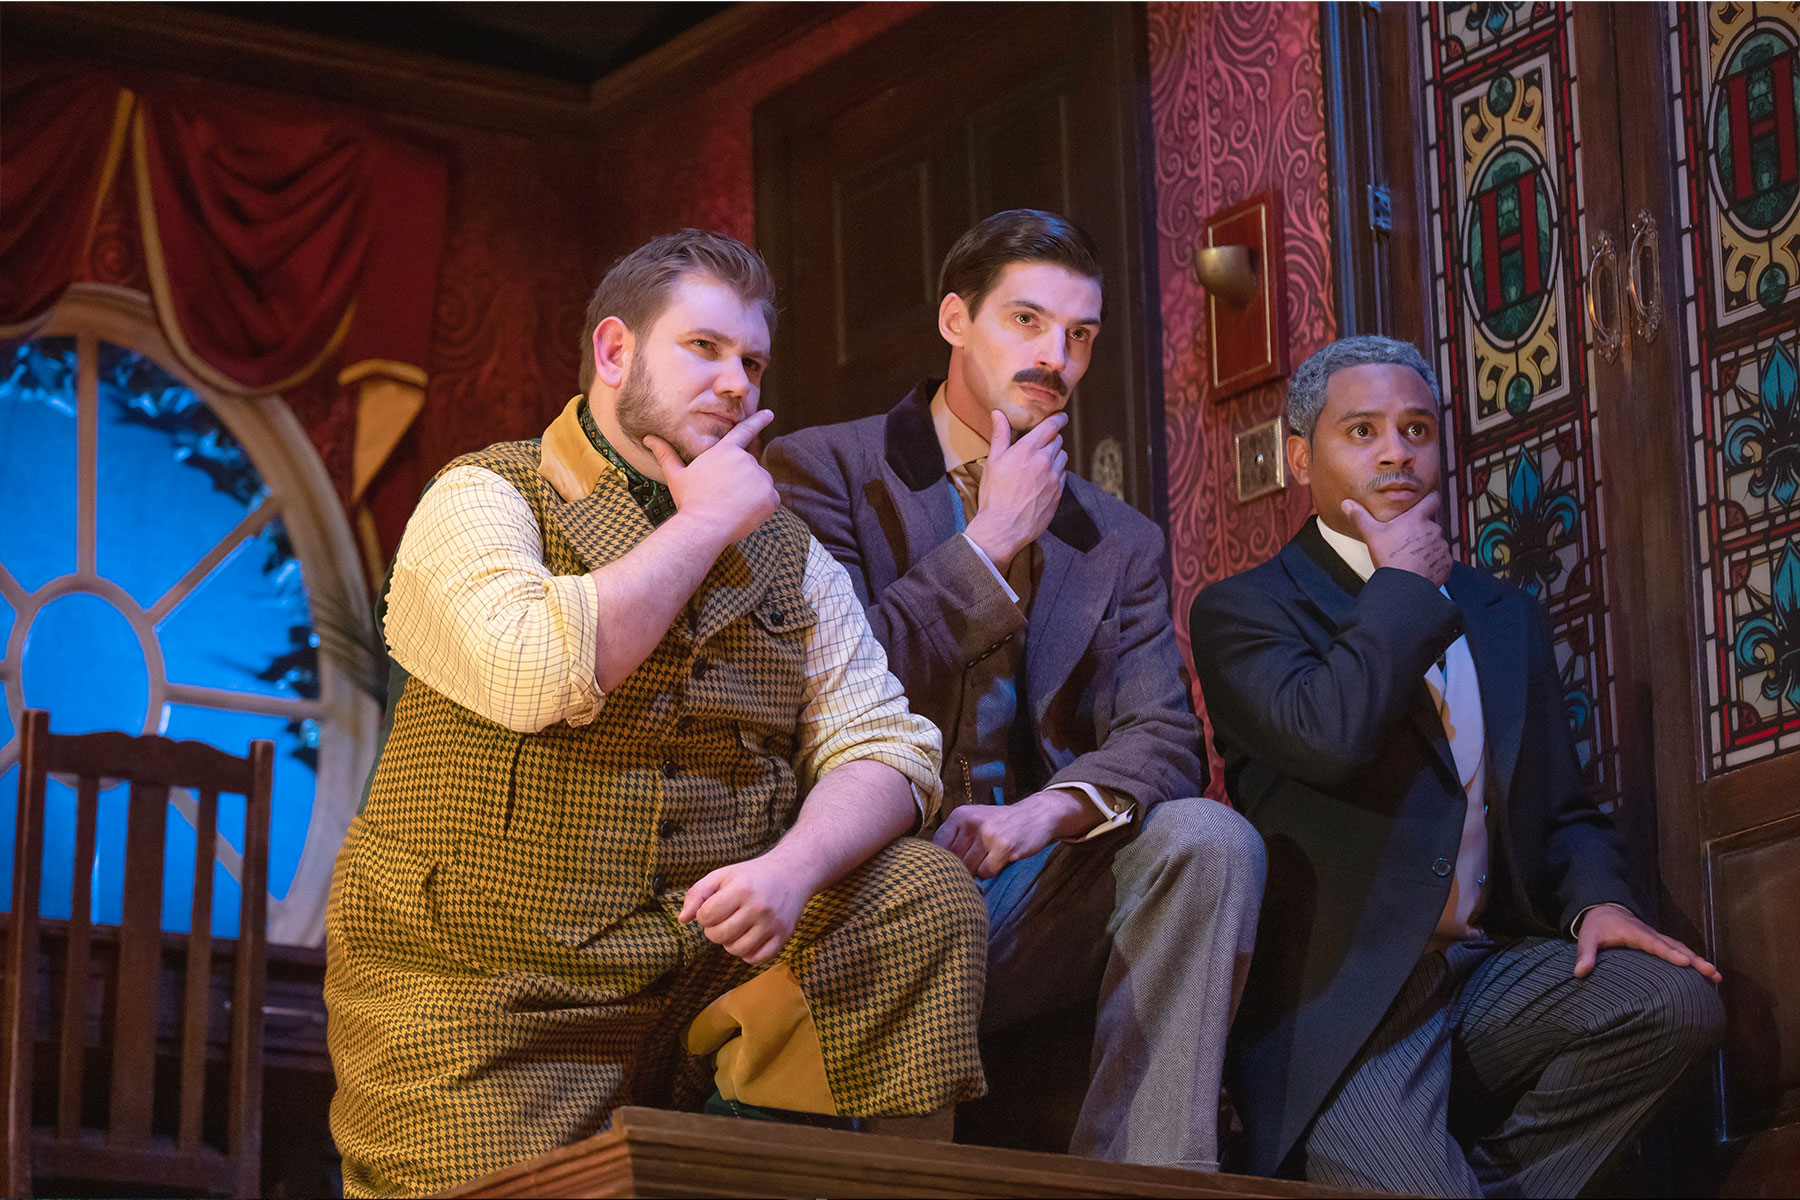 Owen Jenkins, Daniel Fraser and Daniel Anthony in a scene from The Play That Goes Wrong at the Duchess Theatre